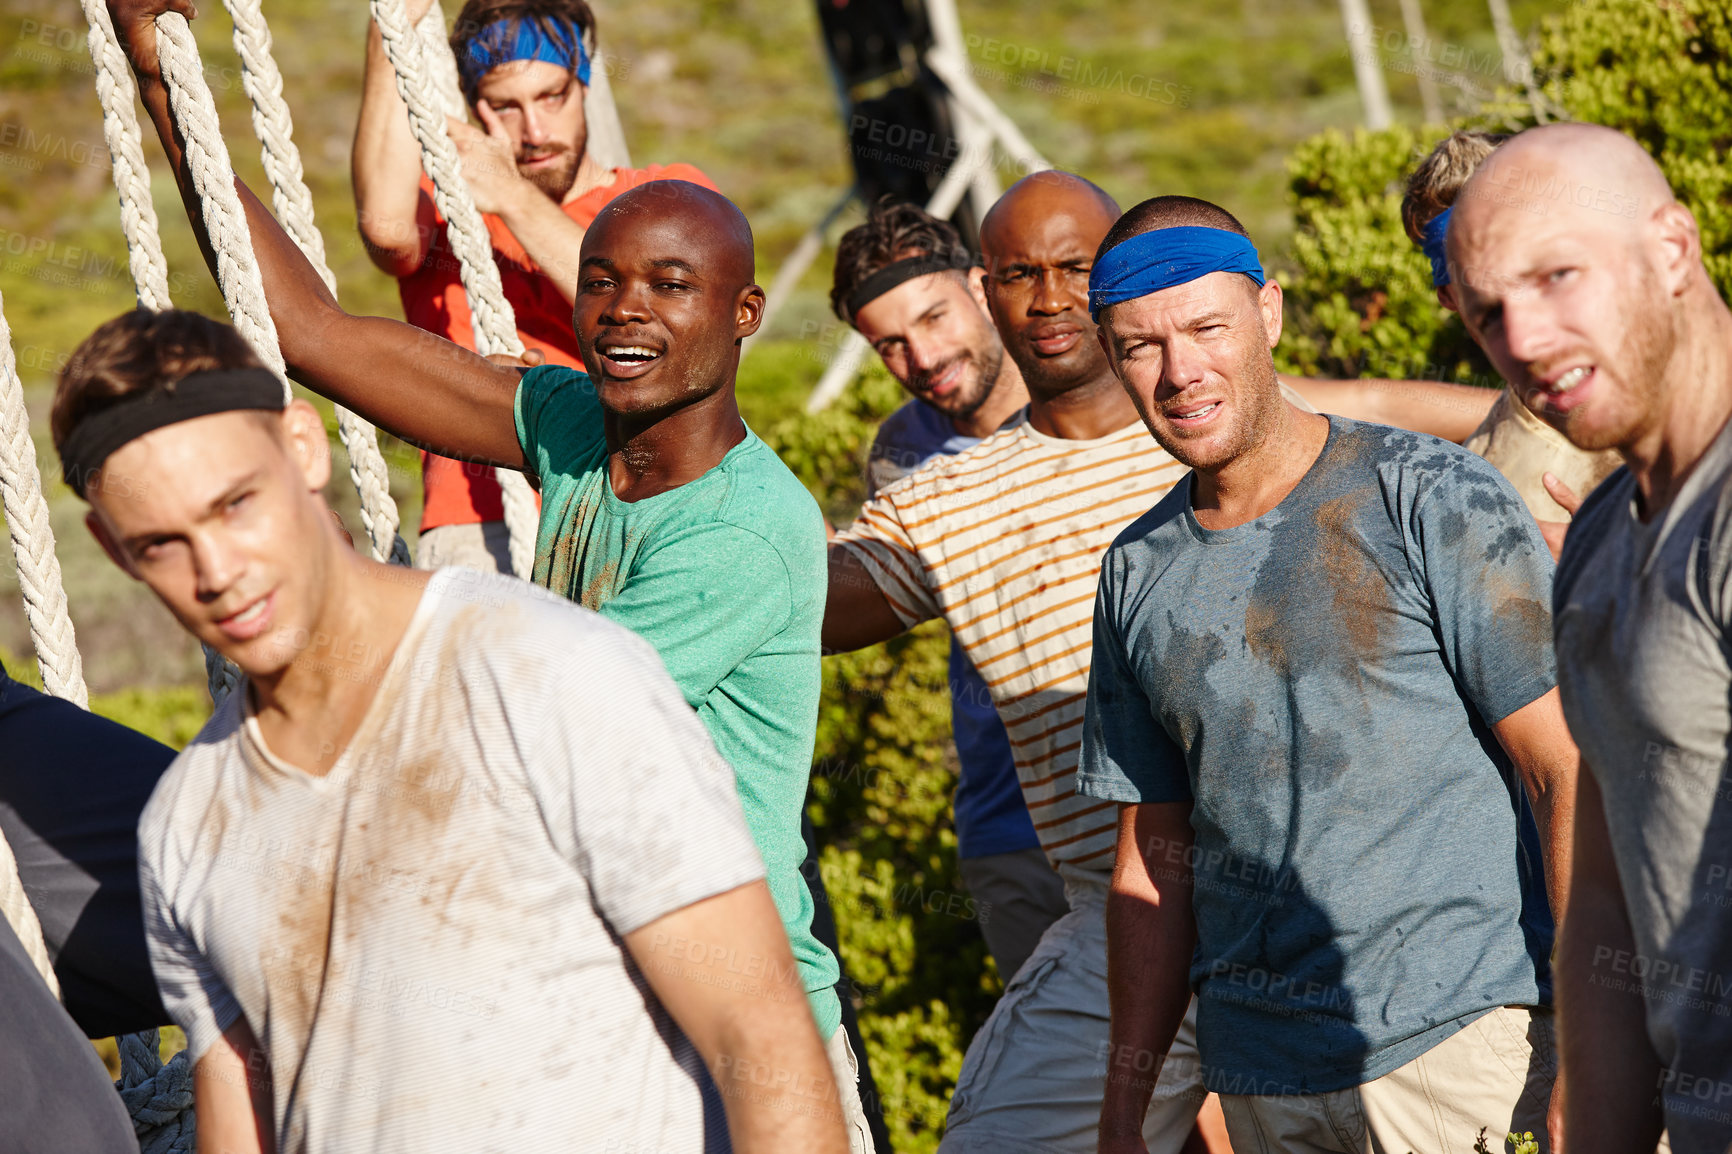 Buy stock photo Cropped shot of a group of men at a military bootcamp